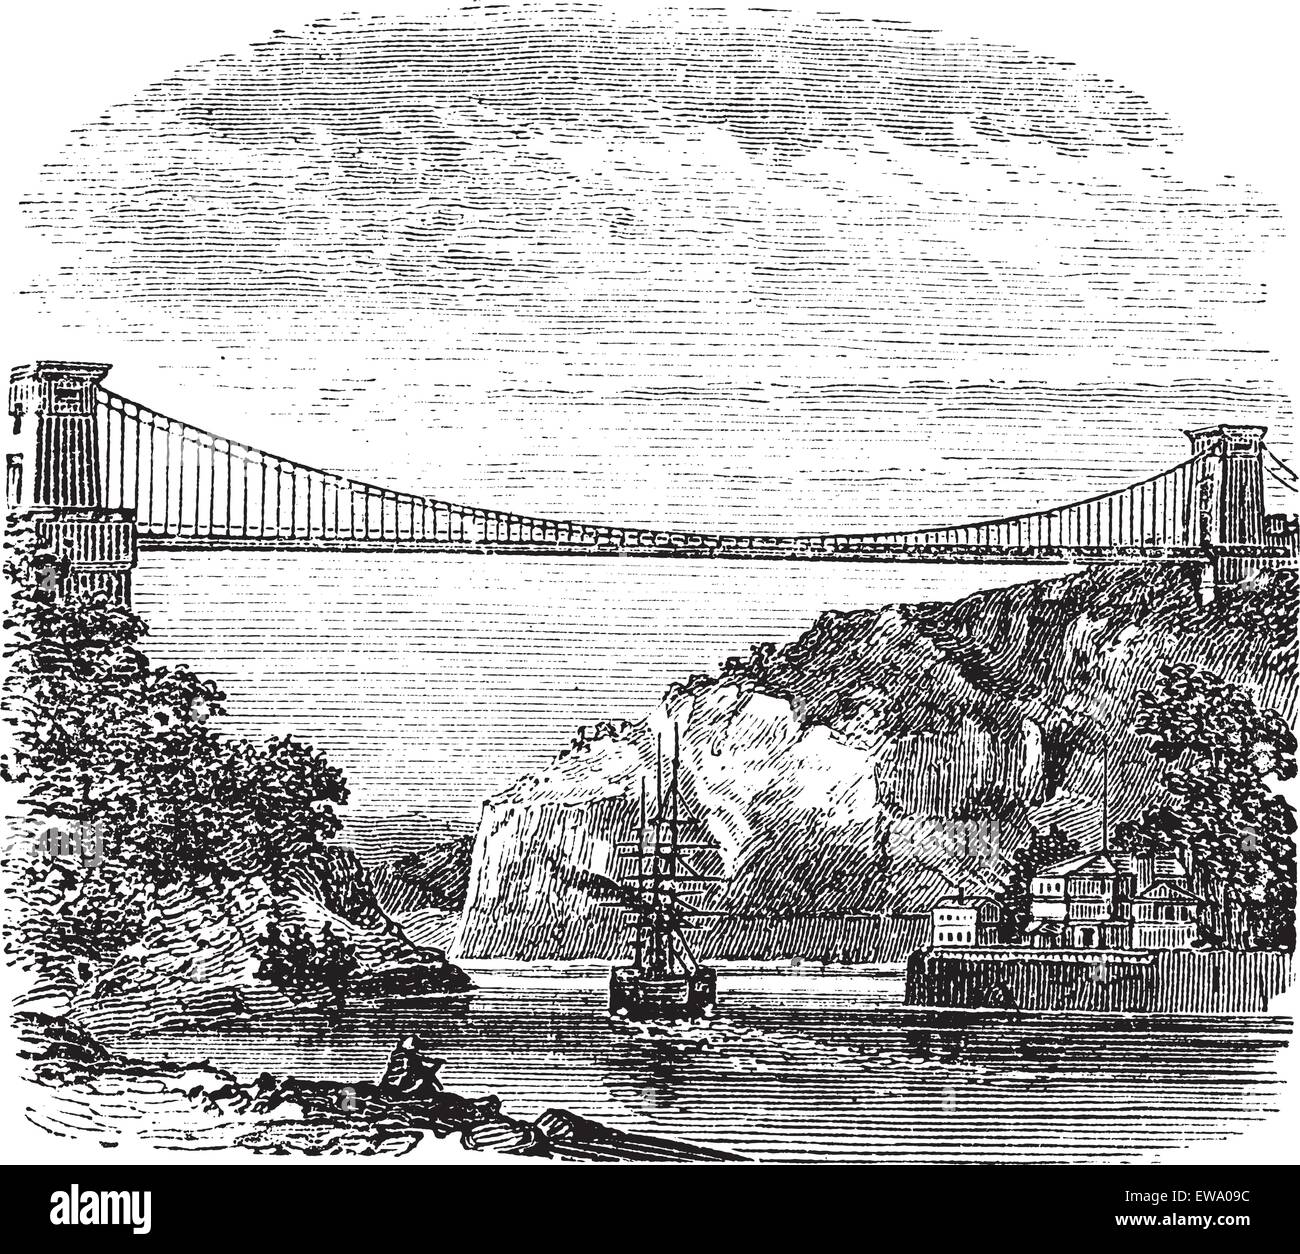 Clifton Suspension Bridge, in Clifton, Bristol to Leigh Woods, North Somerset, England, during the 1890s, vintage engraving. Old engraved illustration of the Clifton Suspension Bridge. Stock Vector